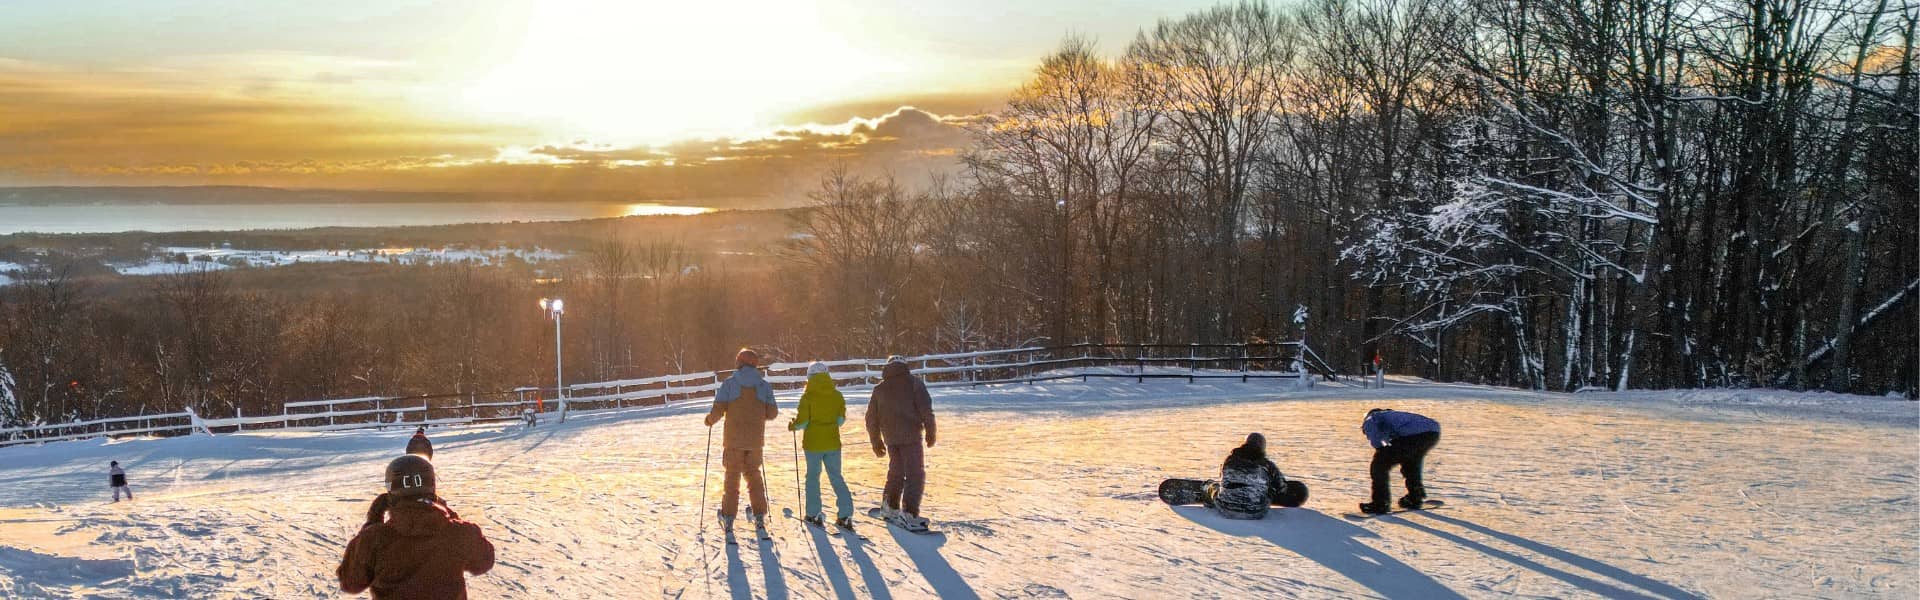 Skiers viewing the overlook at sunset at The Highlands